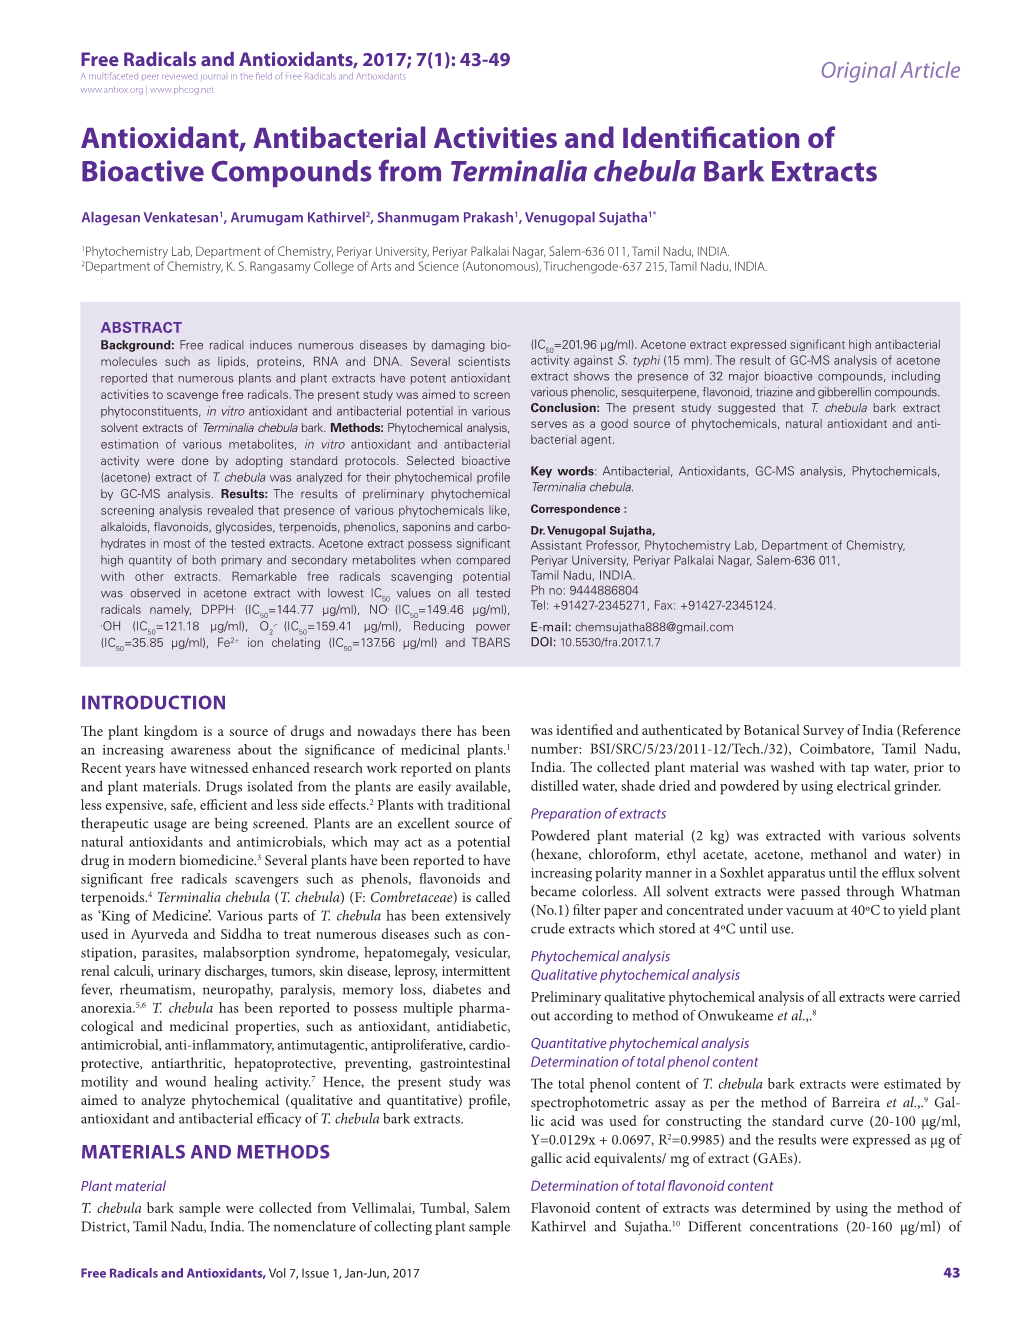 Antioxidant, Antibacterial Activities and Identification of Bioactive Compounds from Terminalia Chebula Bark Extracts